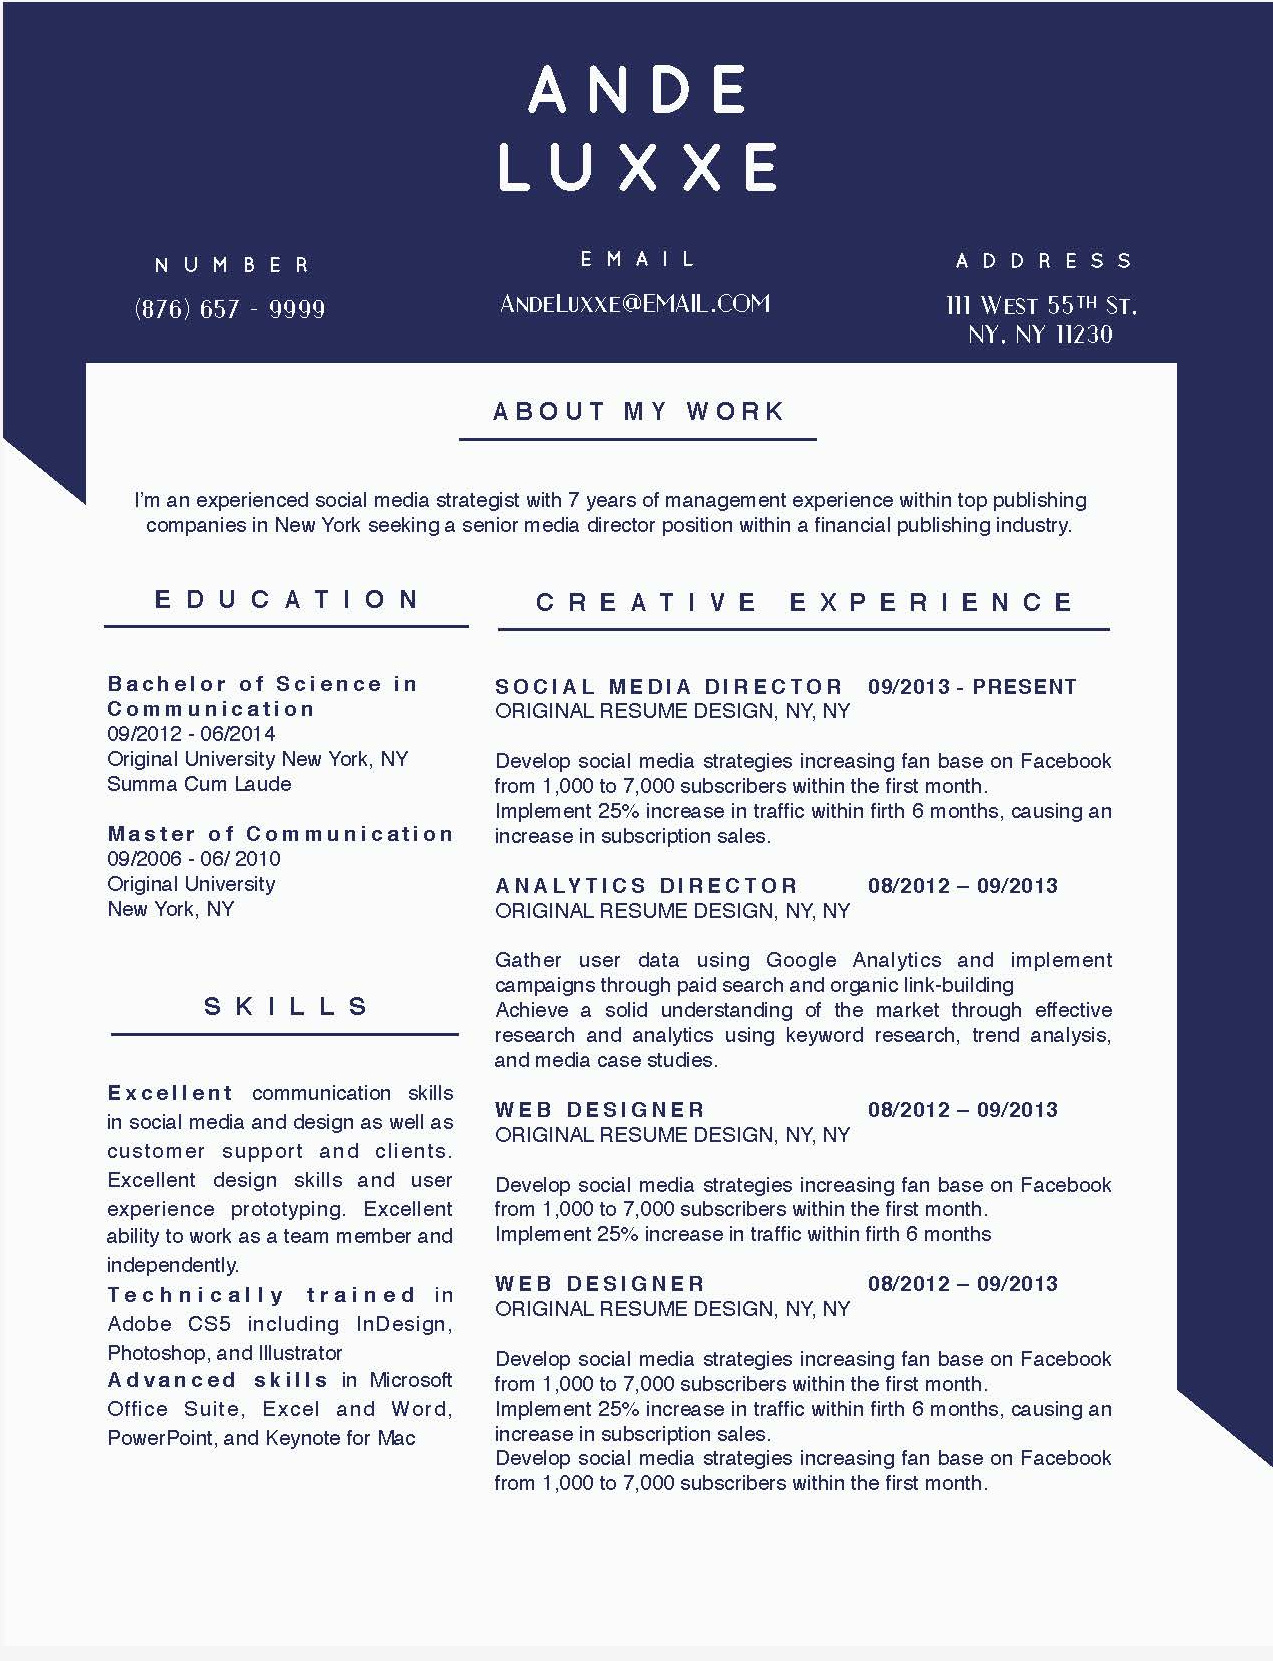 Ande Luxxe Downloadable Resume + Cover Template and Cover Letter Template for Microsoft Word and Apple Pages. This cover letter template is perfect for anyone in the fashion field. The template’s design is a modern, unique, colorful, and professional. WE SWEAT THE DETAILS, SO YOU DON’T HAVE TO Stand Out Shop resume templates for Microsoft Word and Apple Pages will help you design a modern and professional resume in minutes! Simply download, open in Microsoft Word or Apple Pages, and input your resume’s information. Increase your chances of landing your dream job with a job winning, modern, simple, and scannable resume template for Microsoft Word and Apple Pages. Creating a resume shouldn’t suck Simply download a resume template from Stand Out Shop, enter your information in Microsoft Word or Apple Pages and get a beautifully formatted resume in seconds. Create a unique and vivid resume in minutes. Make an impressive resume. Customize your own layout in Microsoft Word or Apple Pages and introduce yourself in an impressive way. You can download your resume at any time. Stand out from other job seekers with a beautiful professional design.